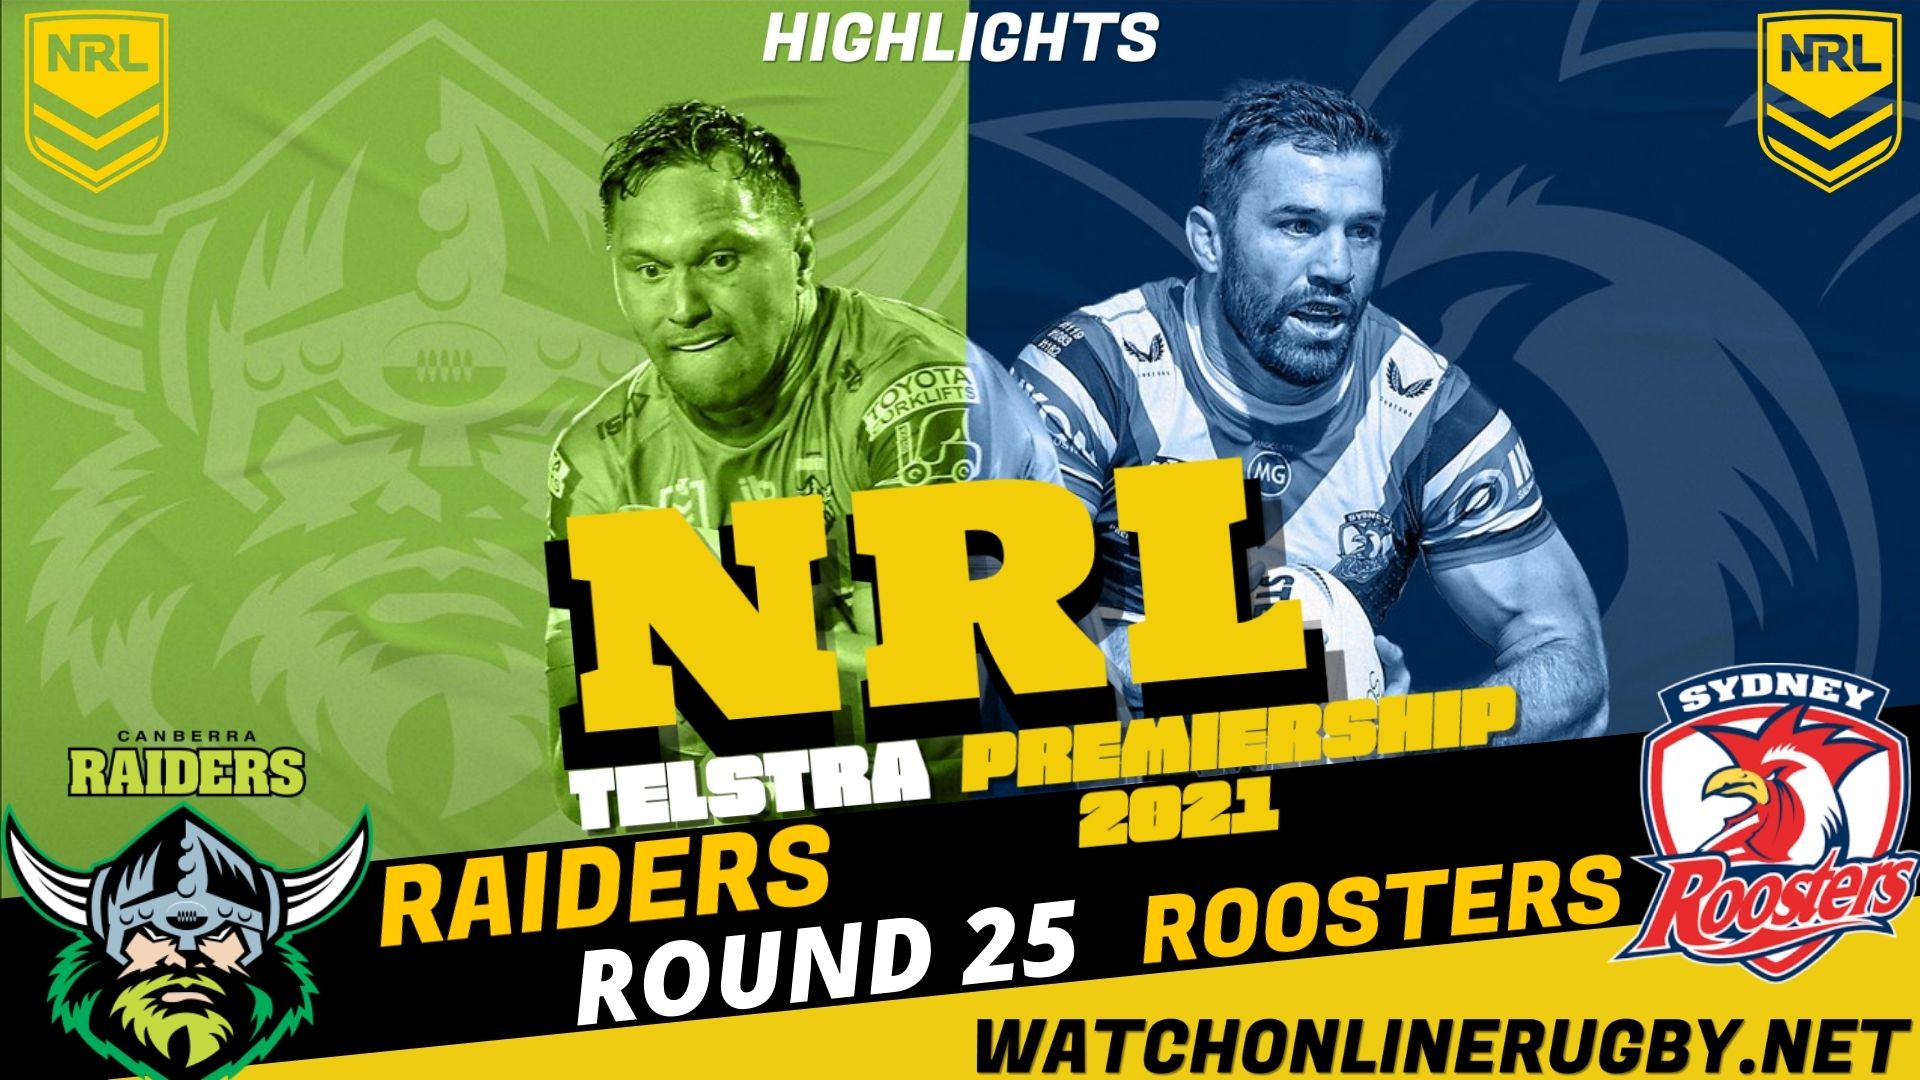 Raiders Vs Roosters Highlights RD 25 NRL Rugby